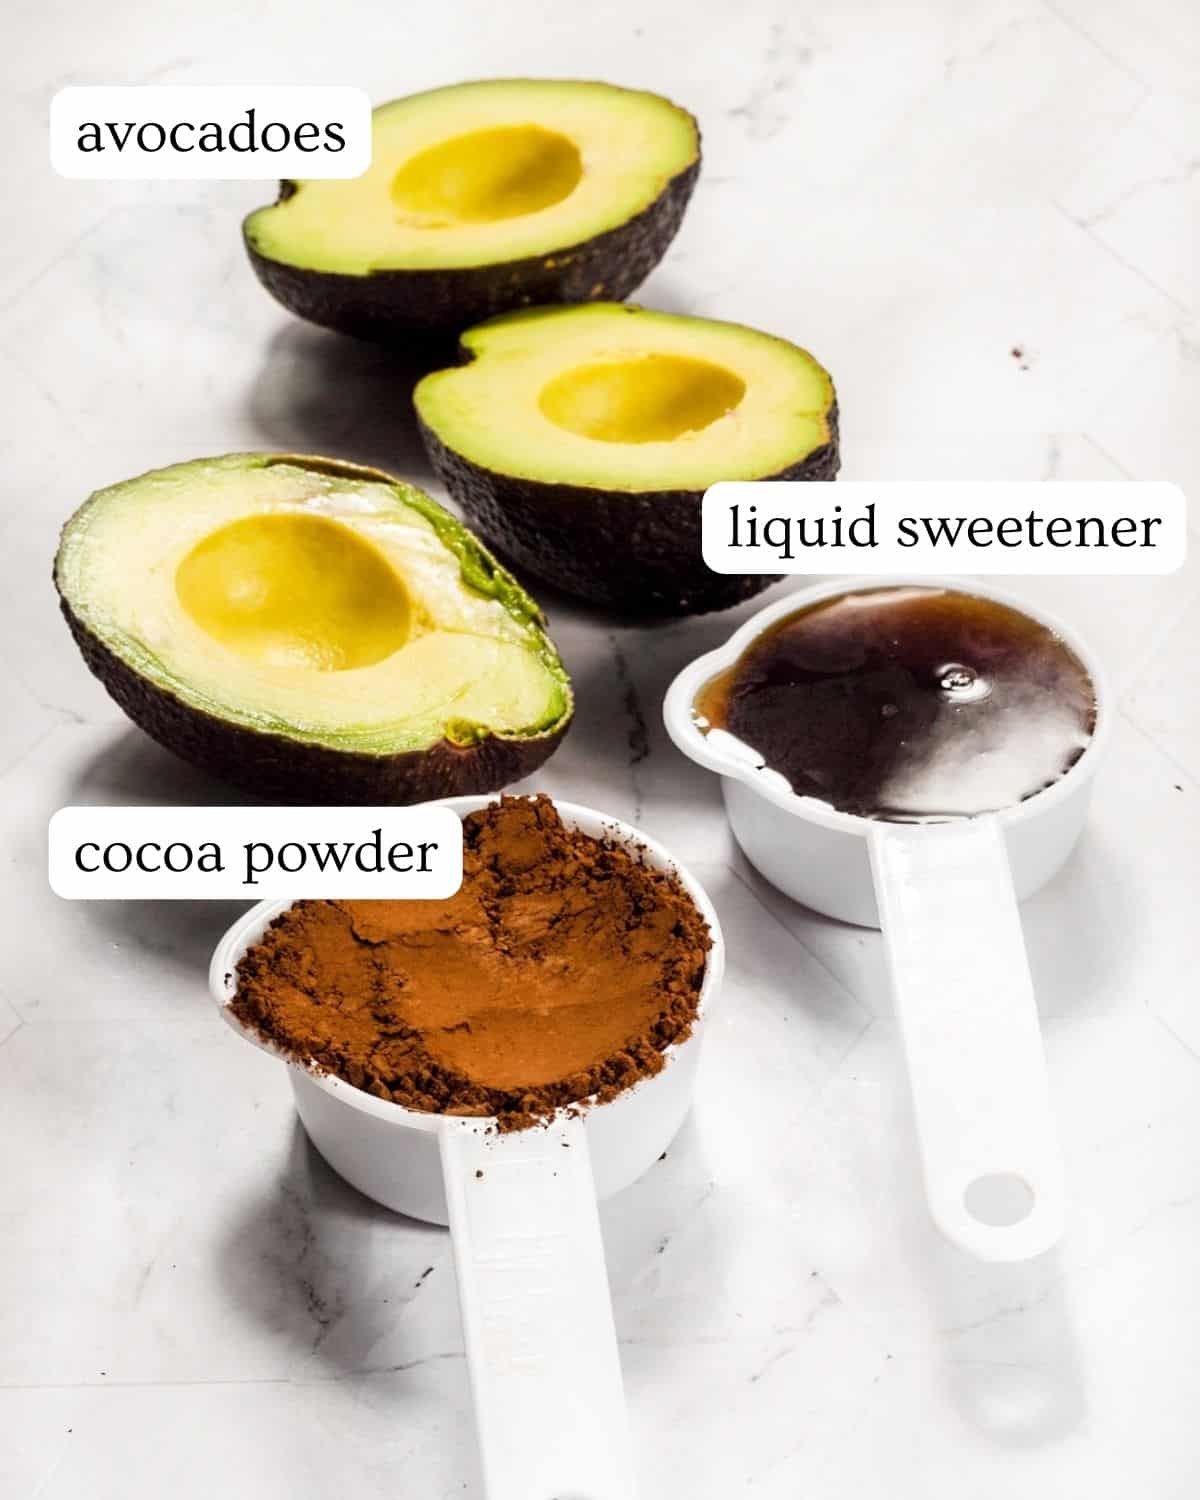 Ingredients for healthy chocolate avocado frosting.